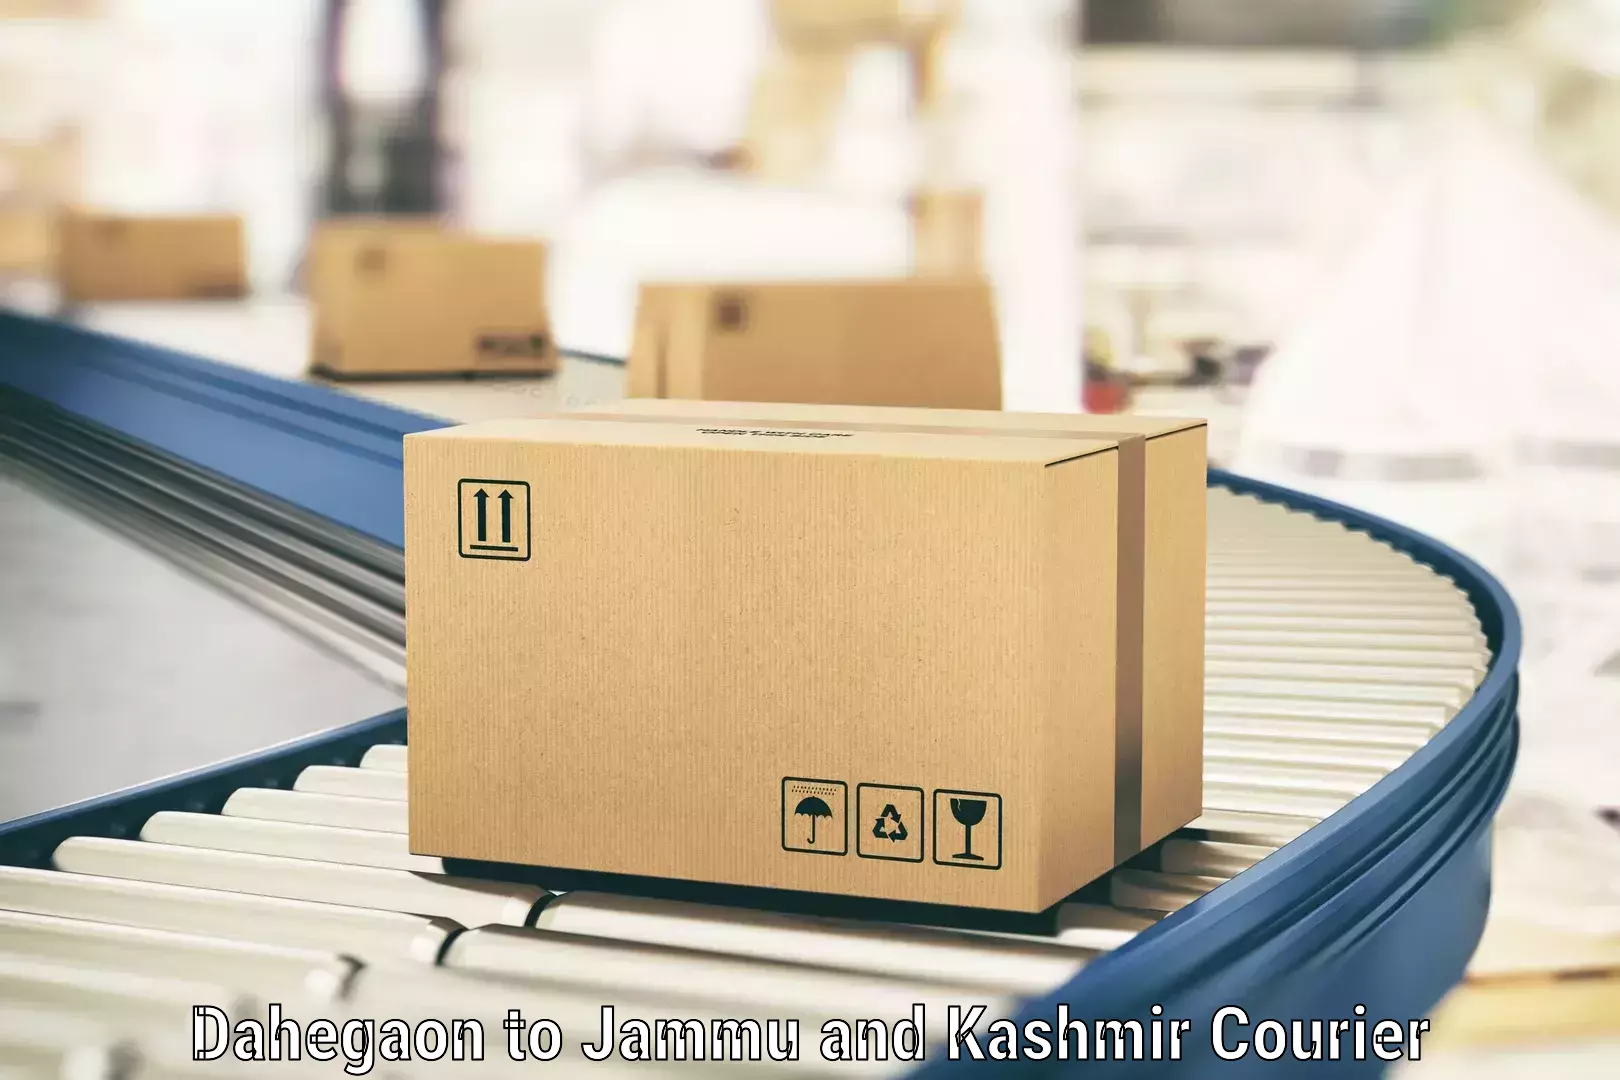 State-of-the-art courier technology Dahegaon to Sopore